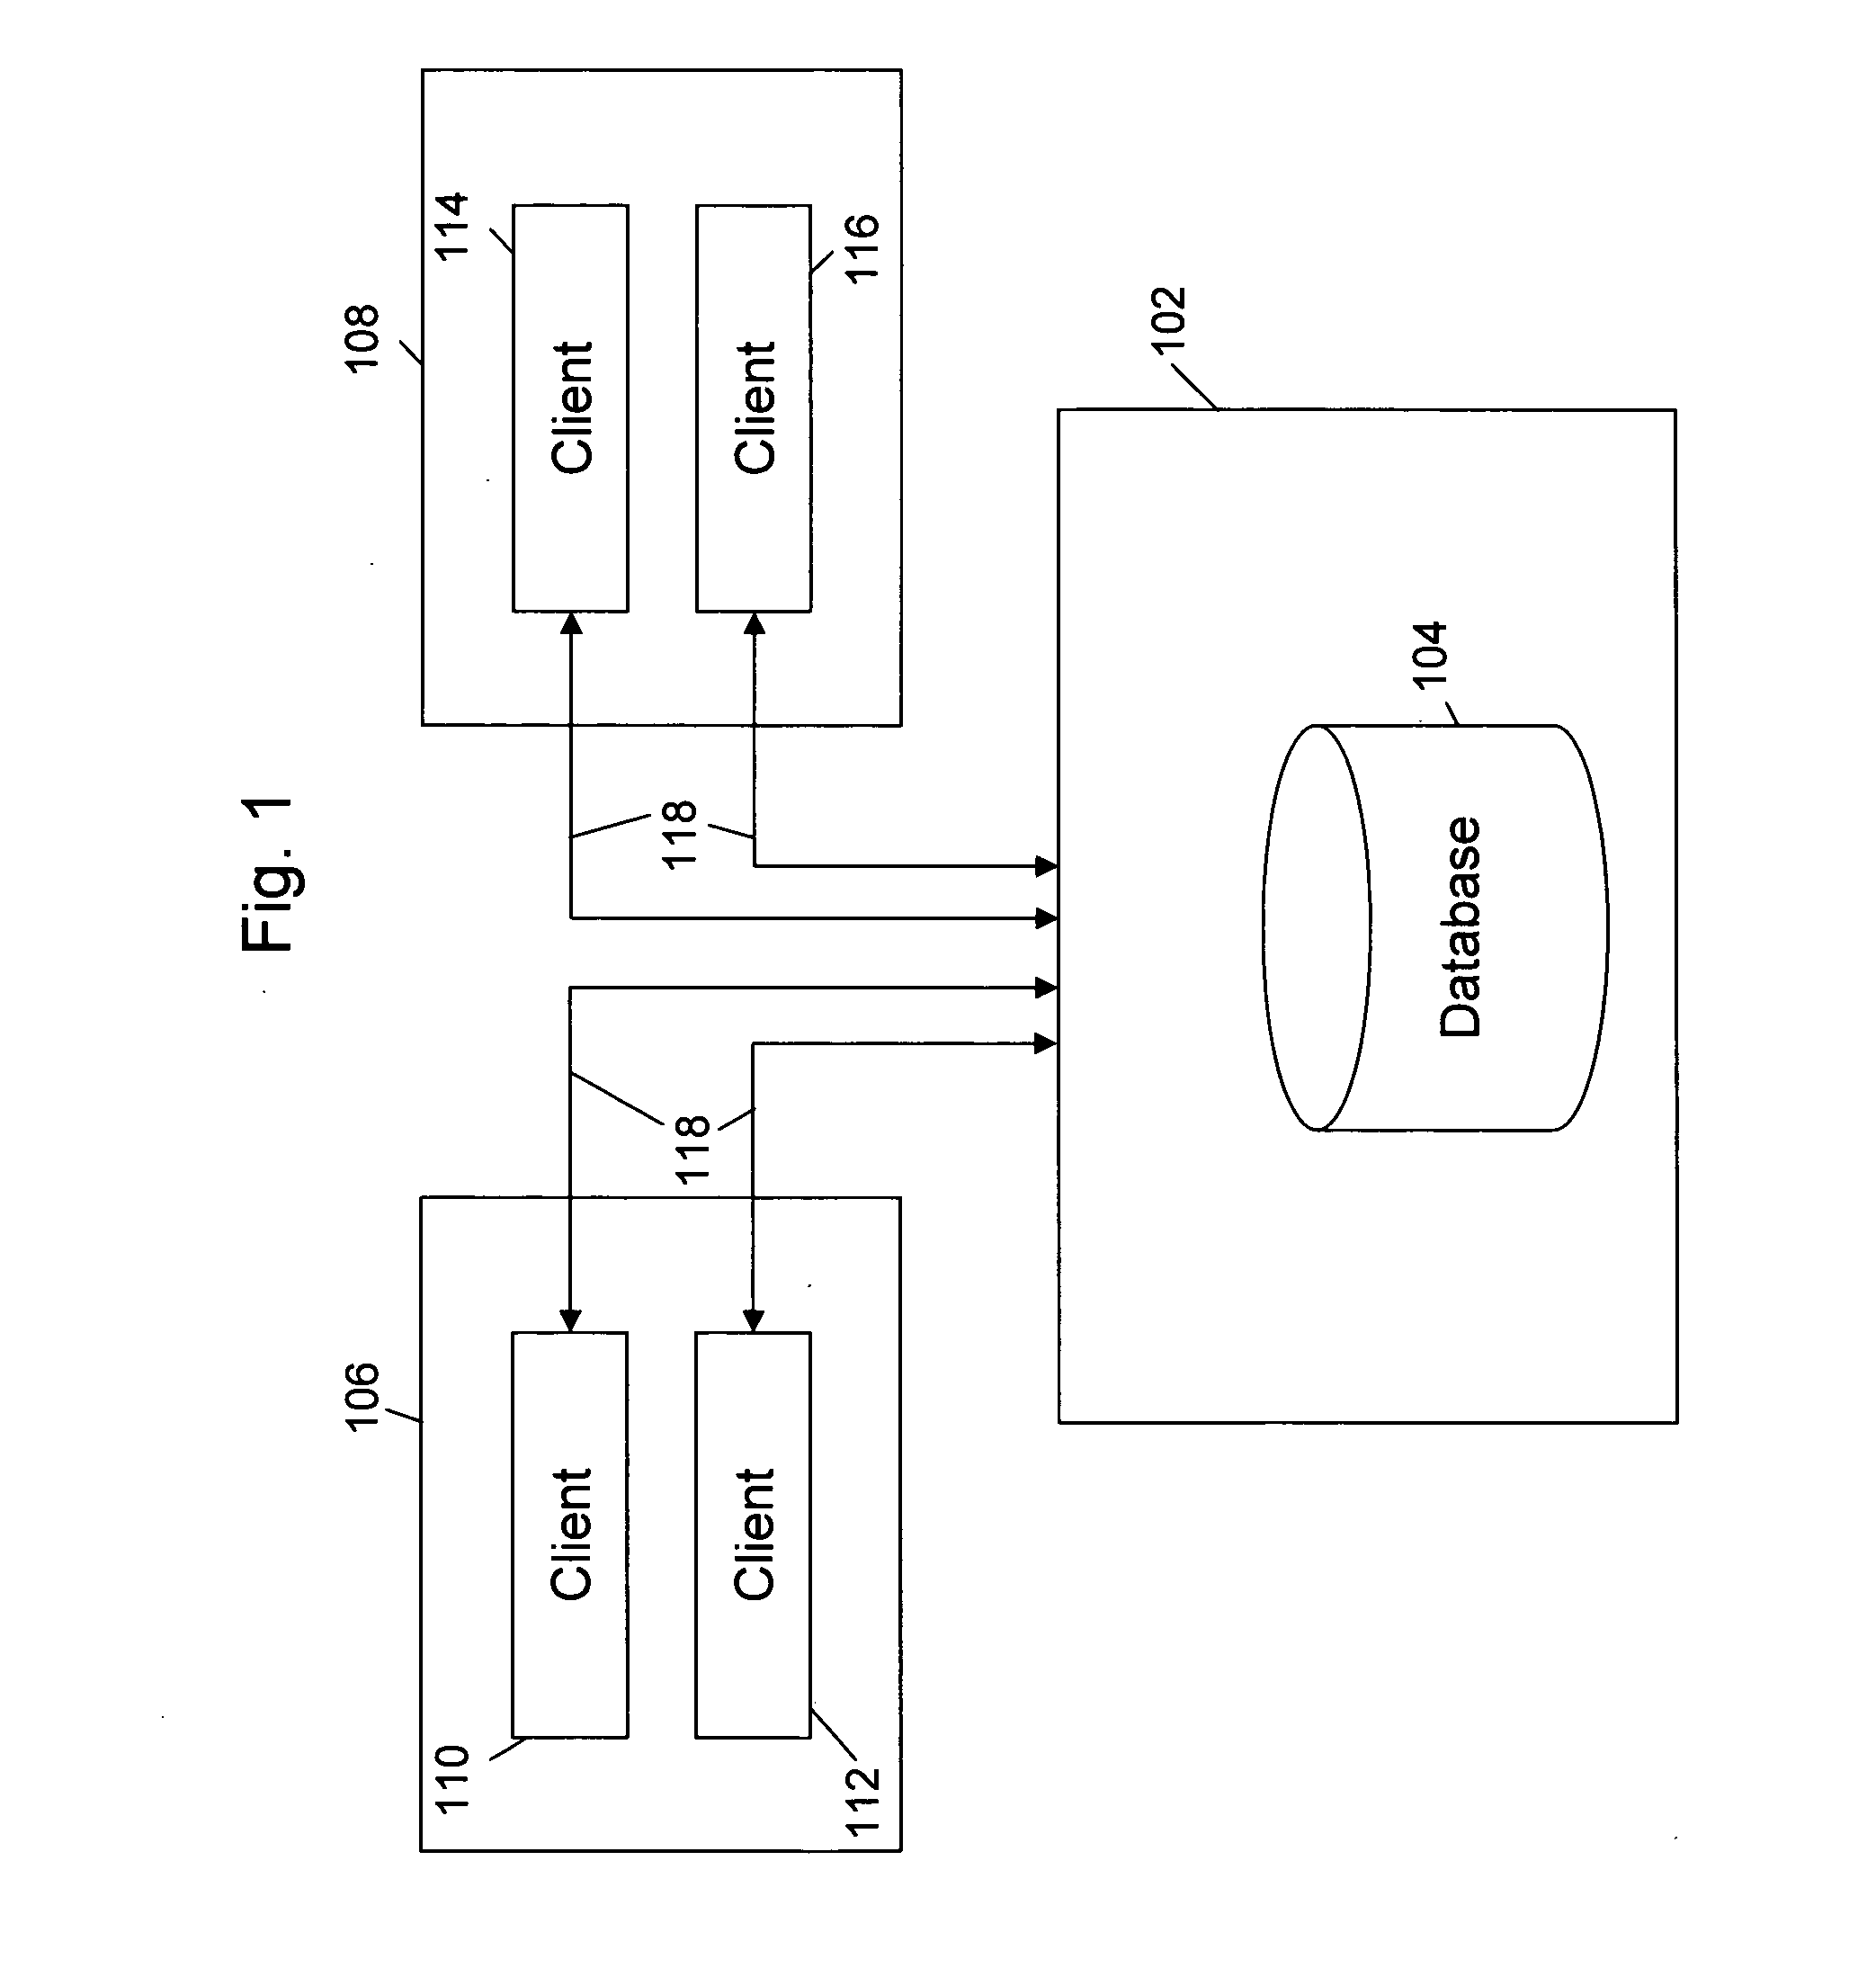 Method and system for comparative community based analytics